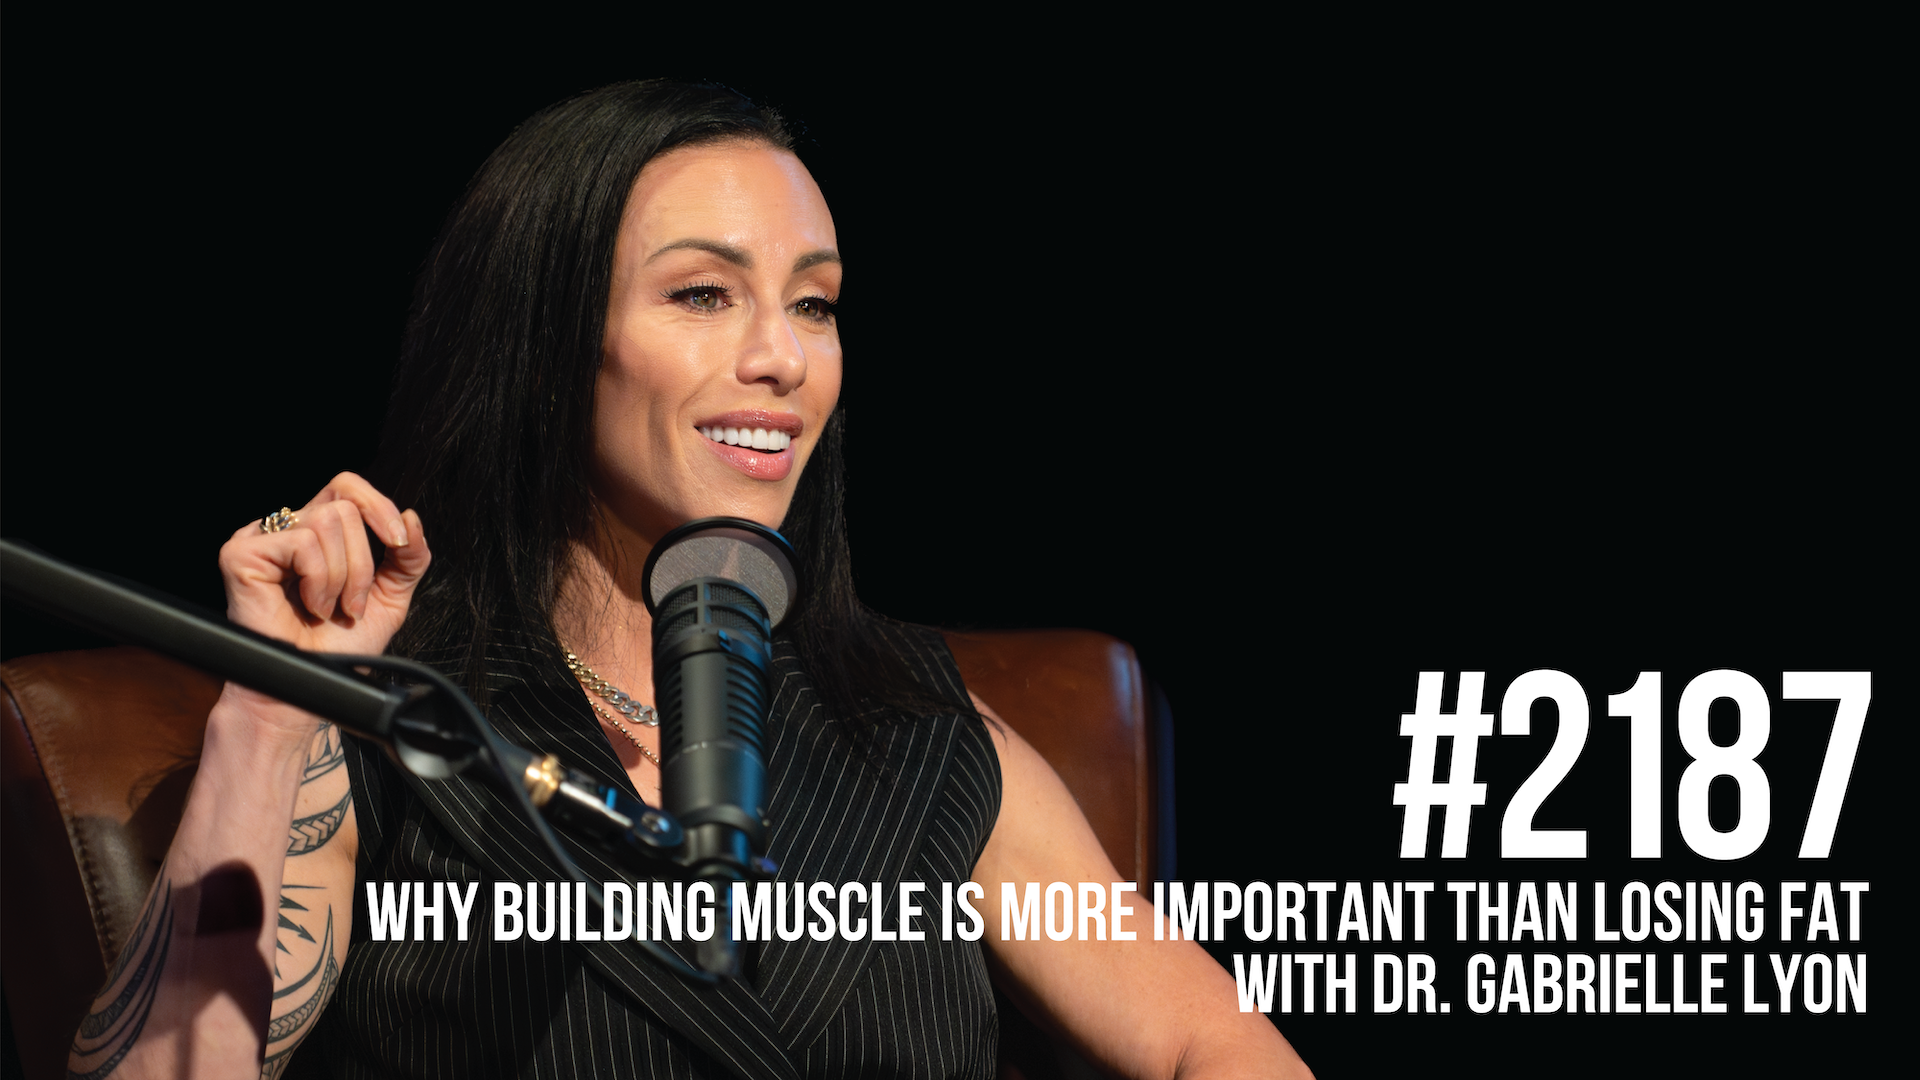 2187: Why Building Muscle Is More Important Than Losing Fat With Dr. Gabrielle Lyon